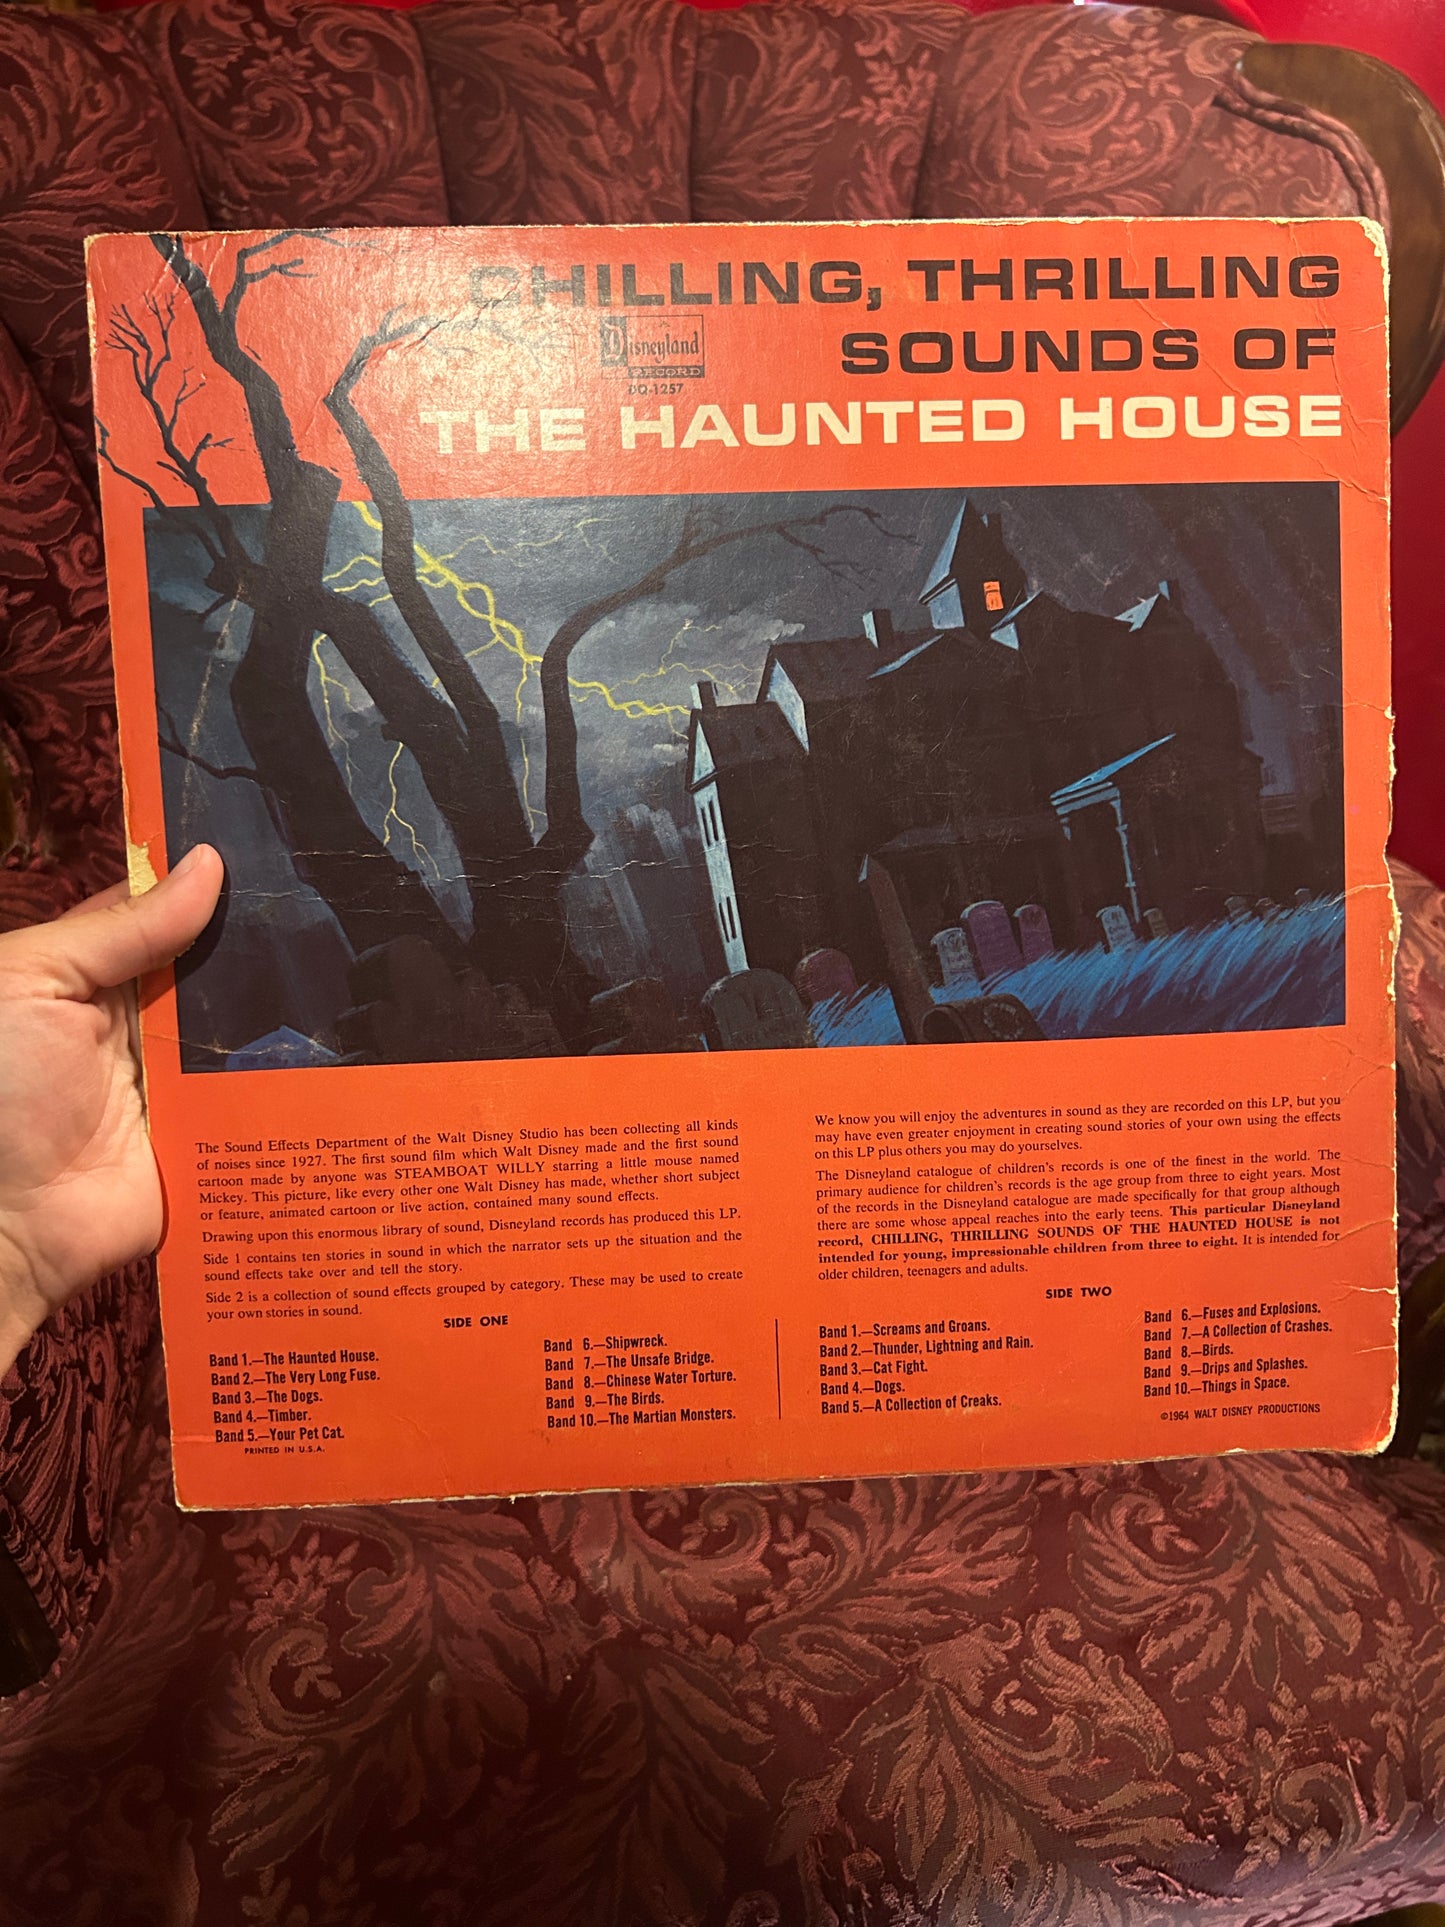 Walt Disney Chilling Thrilling Sounds of the Haunted House LP